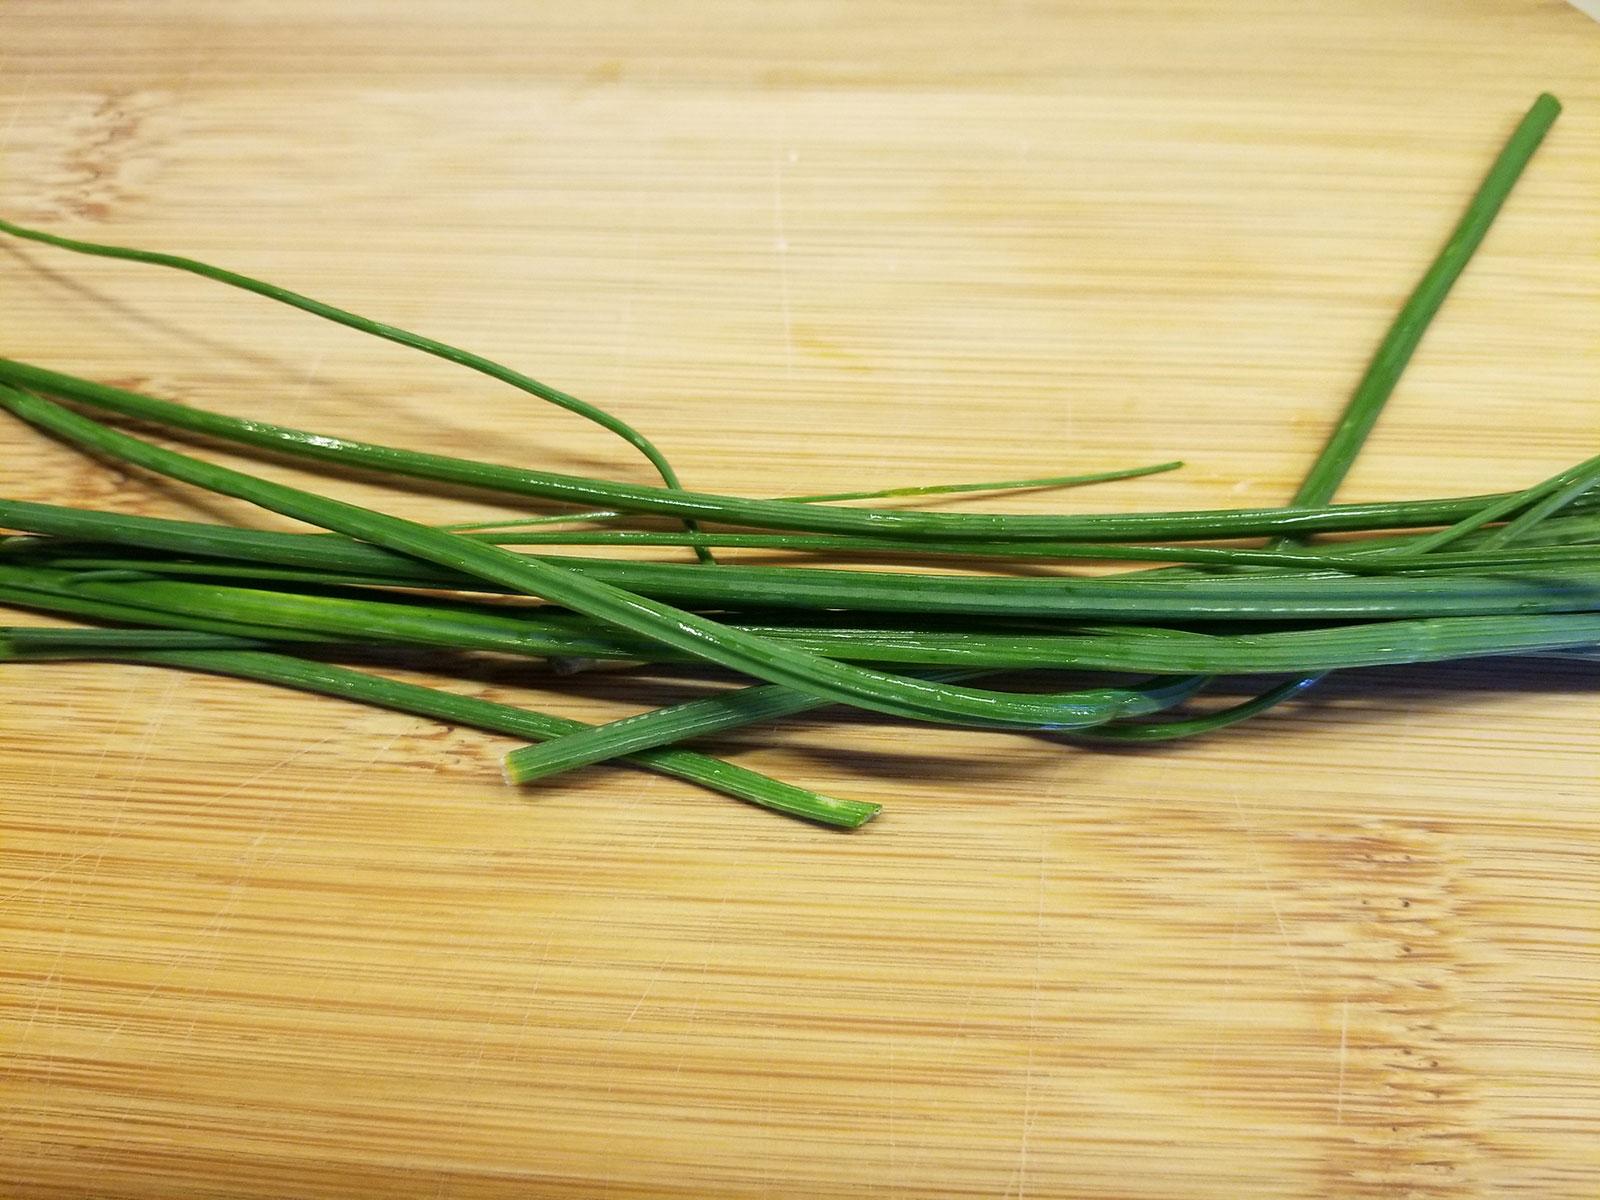 Wild onion is one of the easiest plants for beginning wild food enthusiasts to learn. It's more nutritious with a stronger flavor than regular onions.